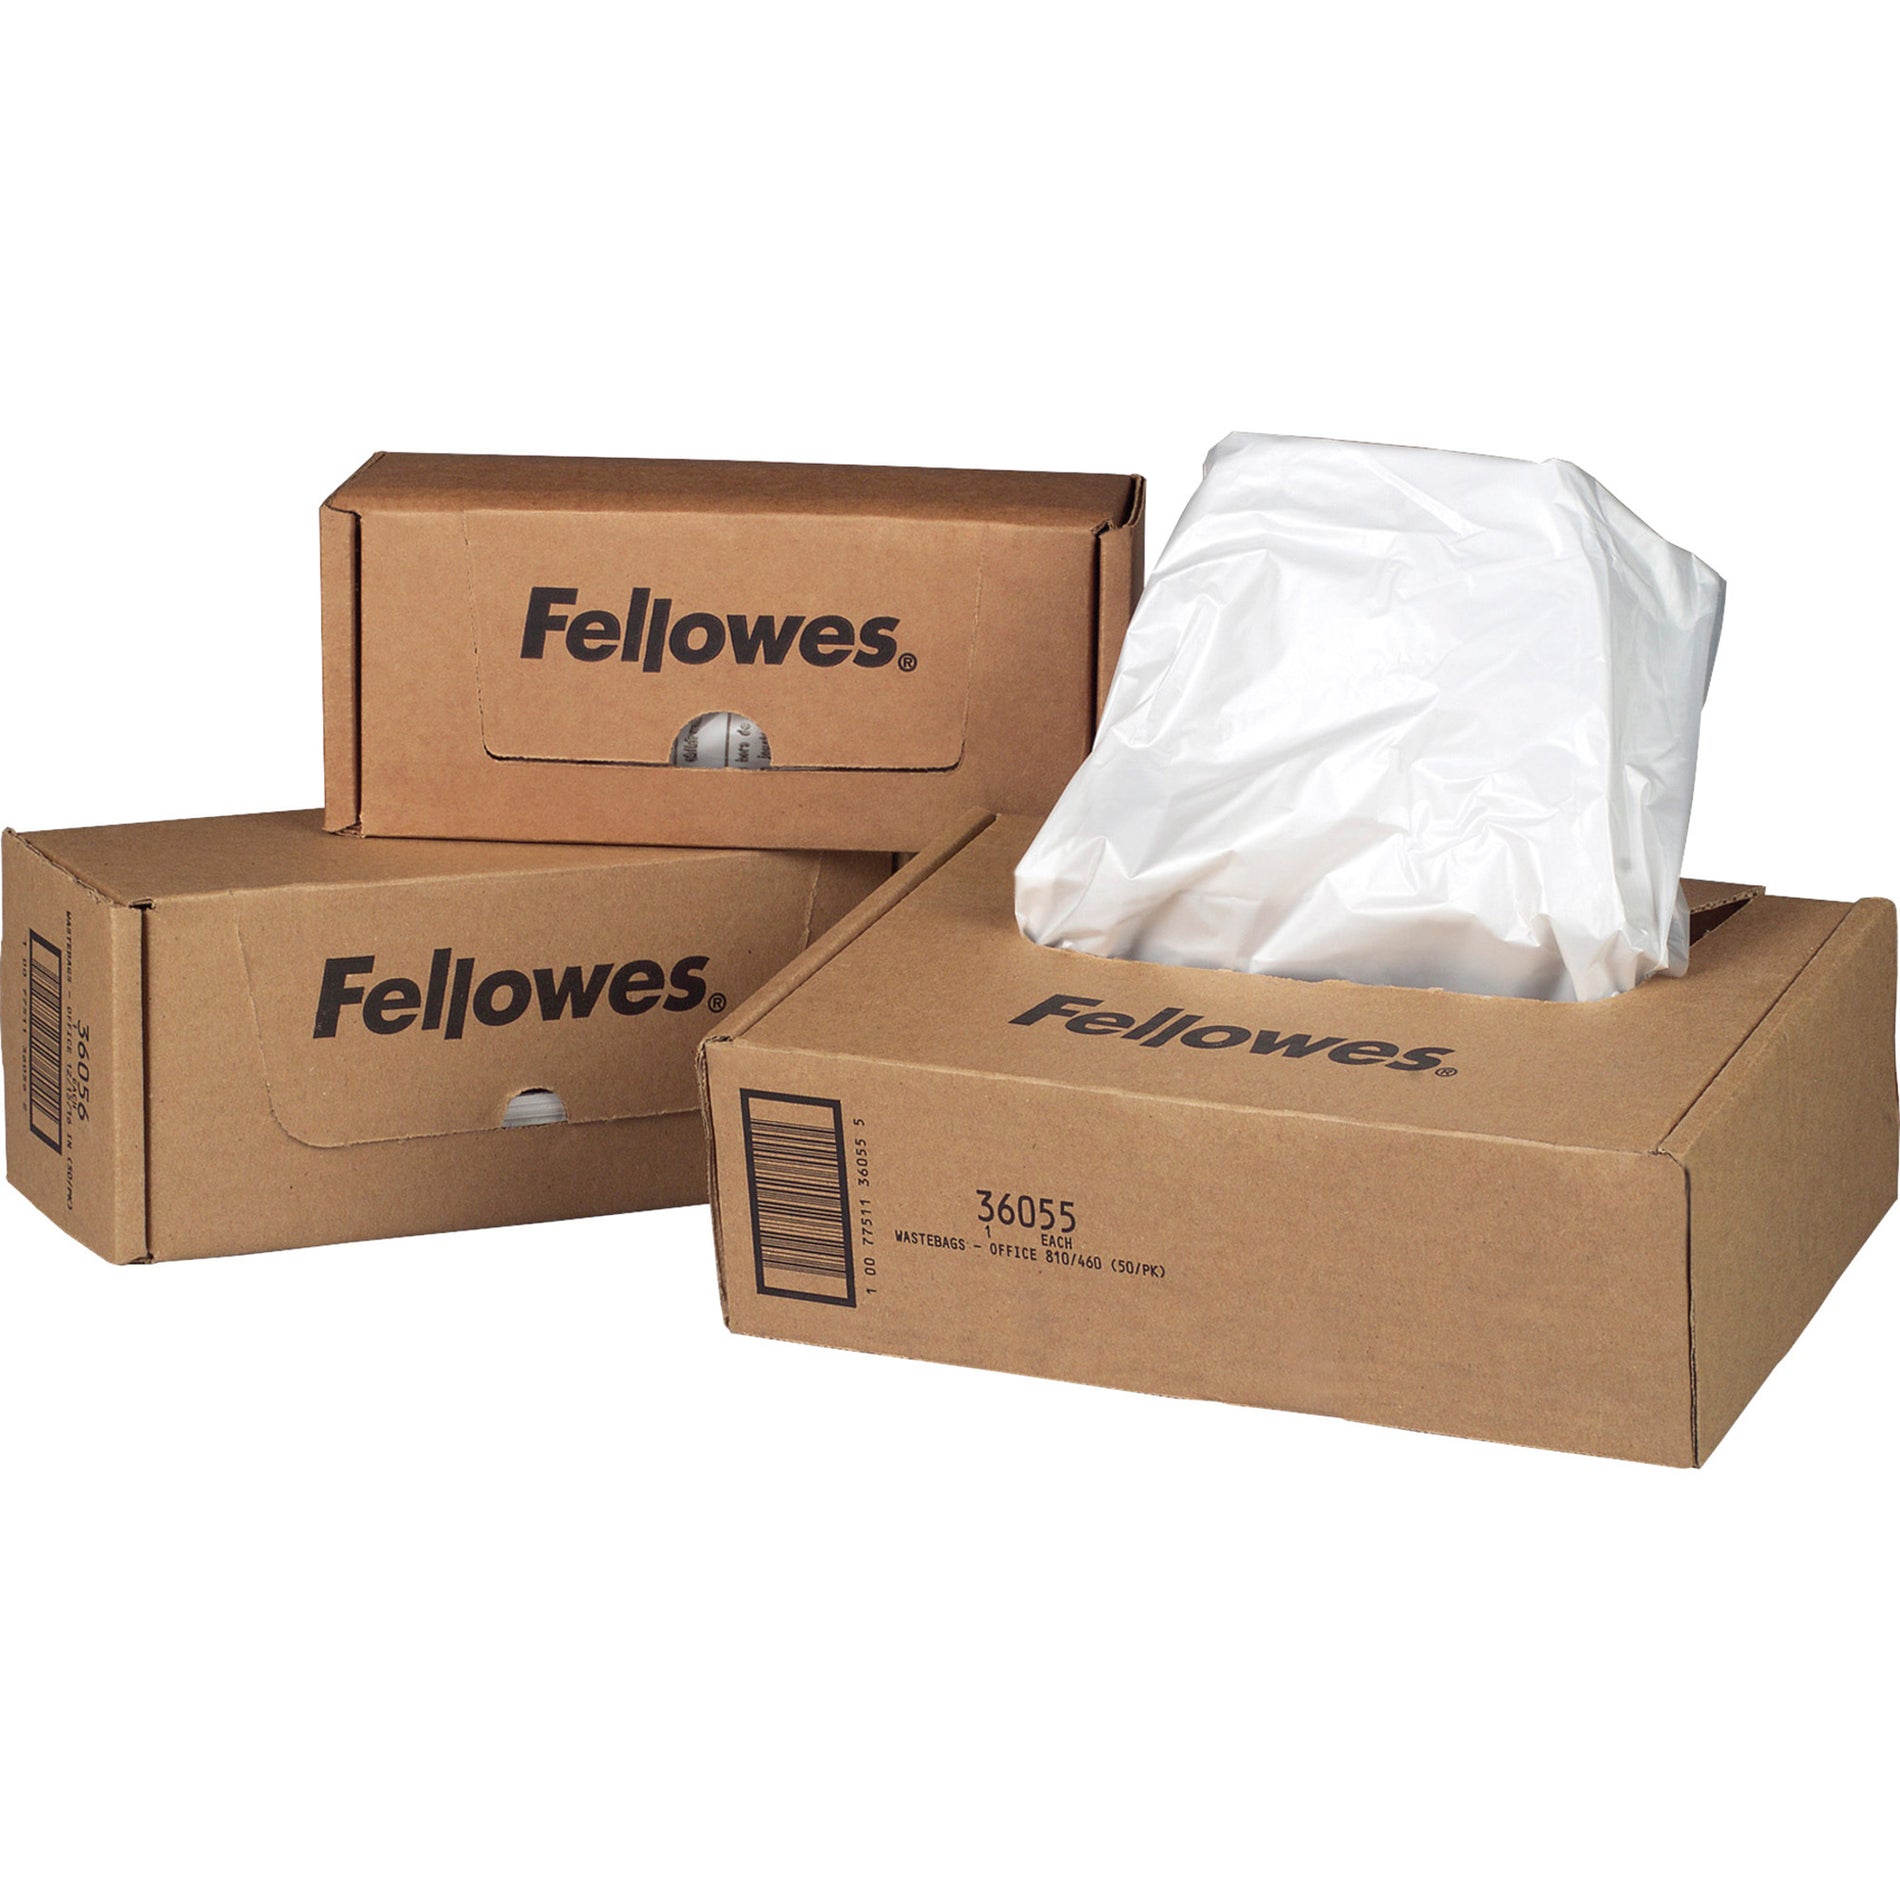 Fellowes 36054 125/225/2250 Series Shredder Waste Bags, Durable, Disposable, Recyclable, 20 gal Capacity